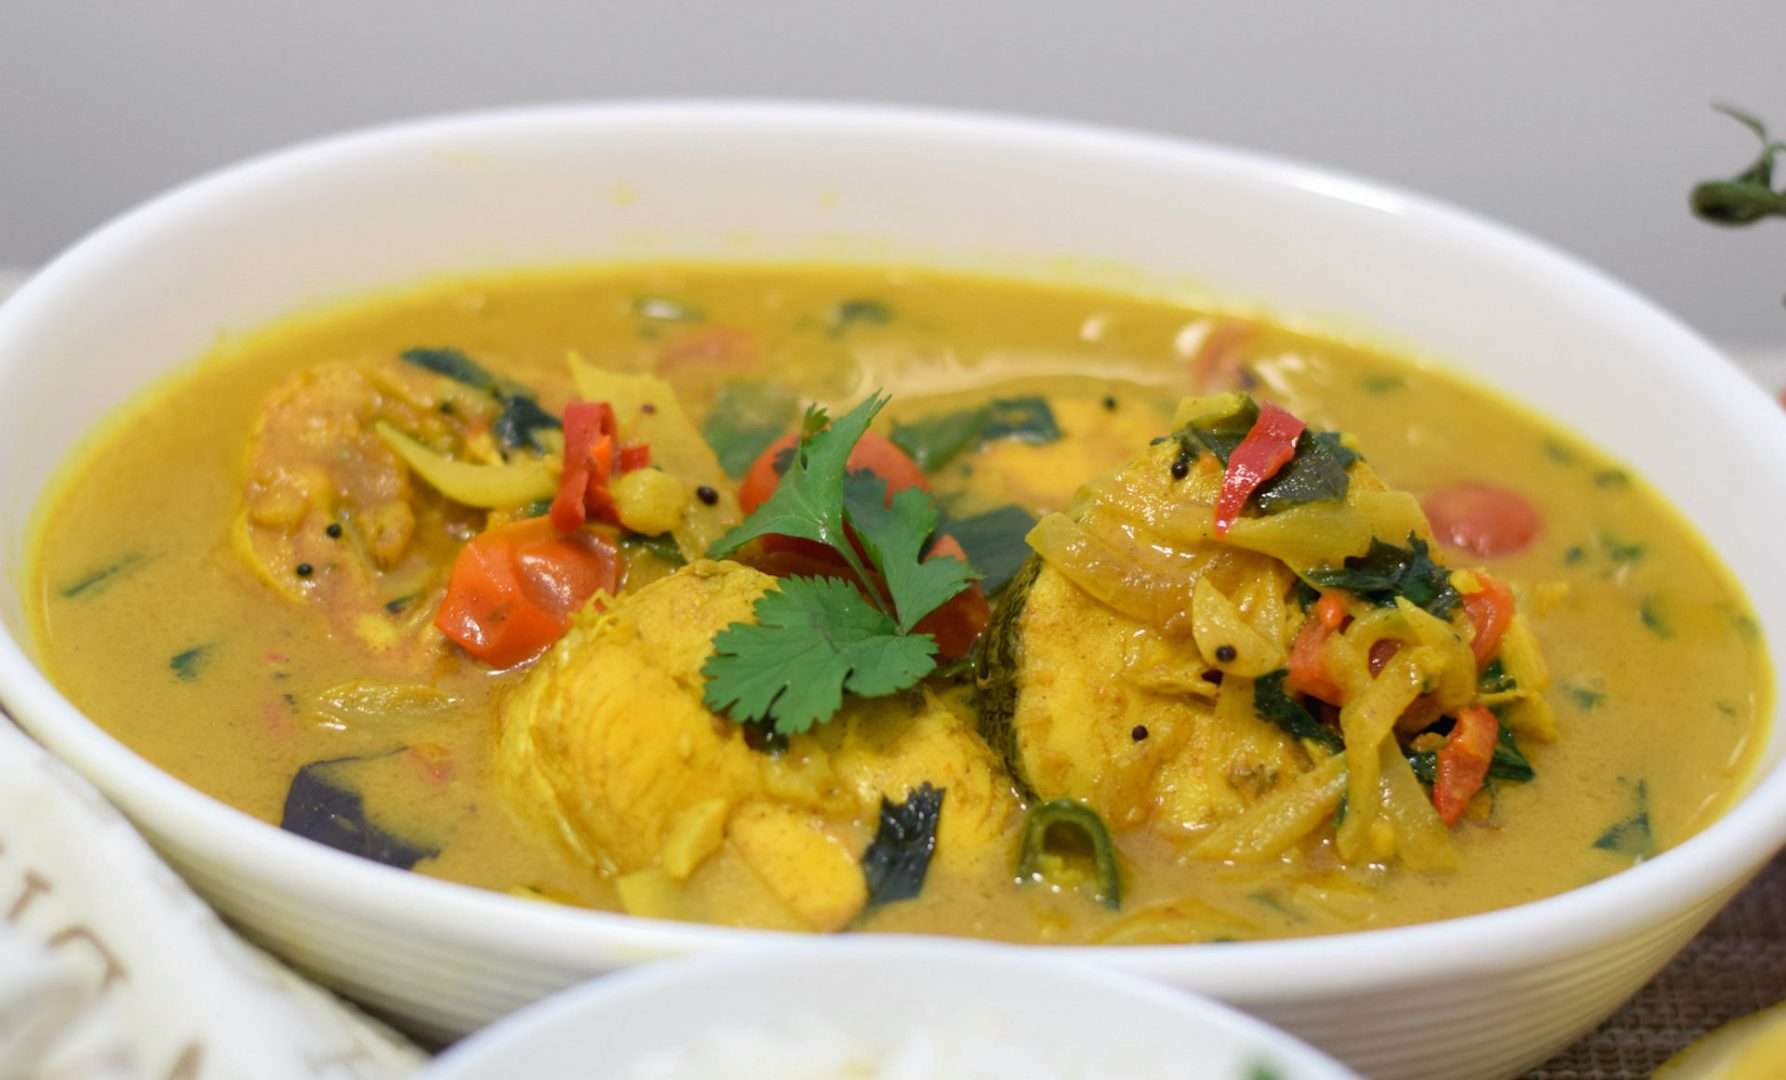 Coconut fish curry: Freshly cooked fish Recipes posted by Lill Brothers